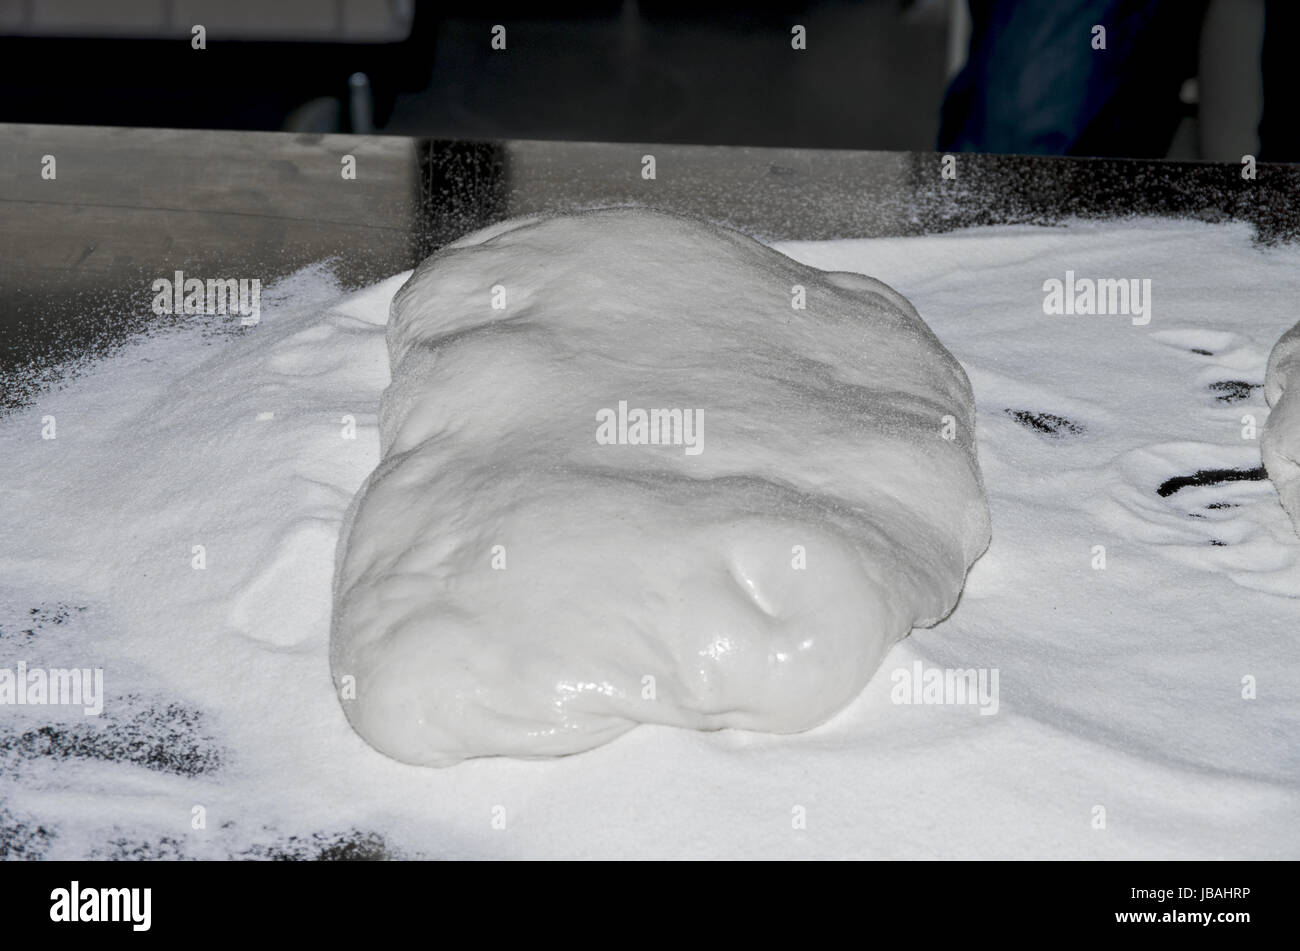 Handling, working and cooking pizza dough with shovel Stock Photo